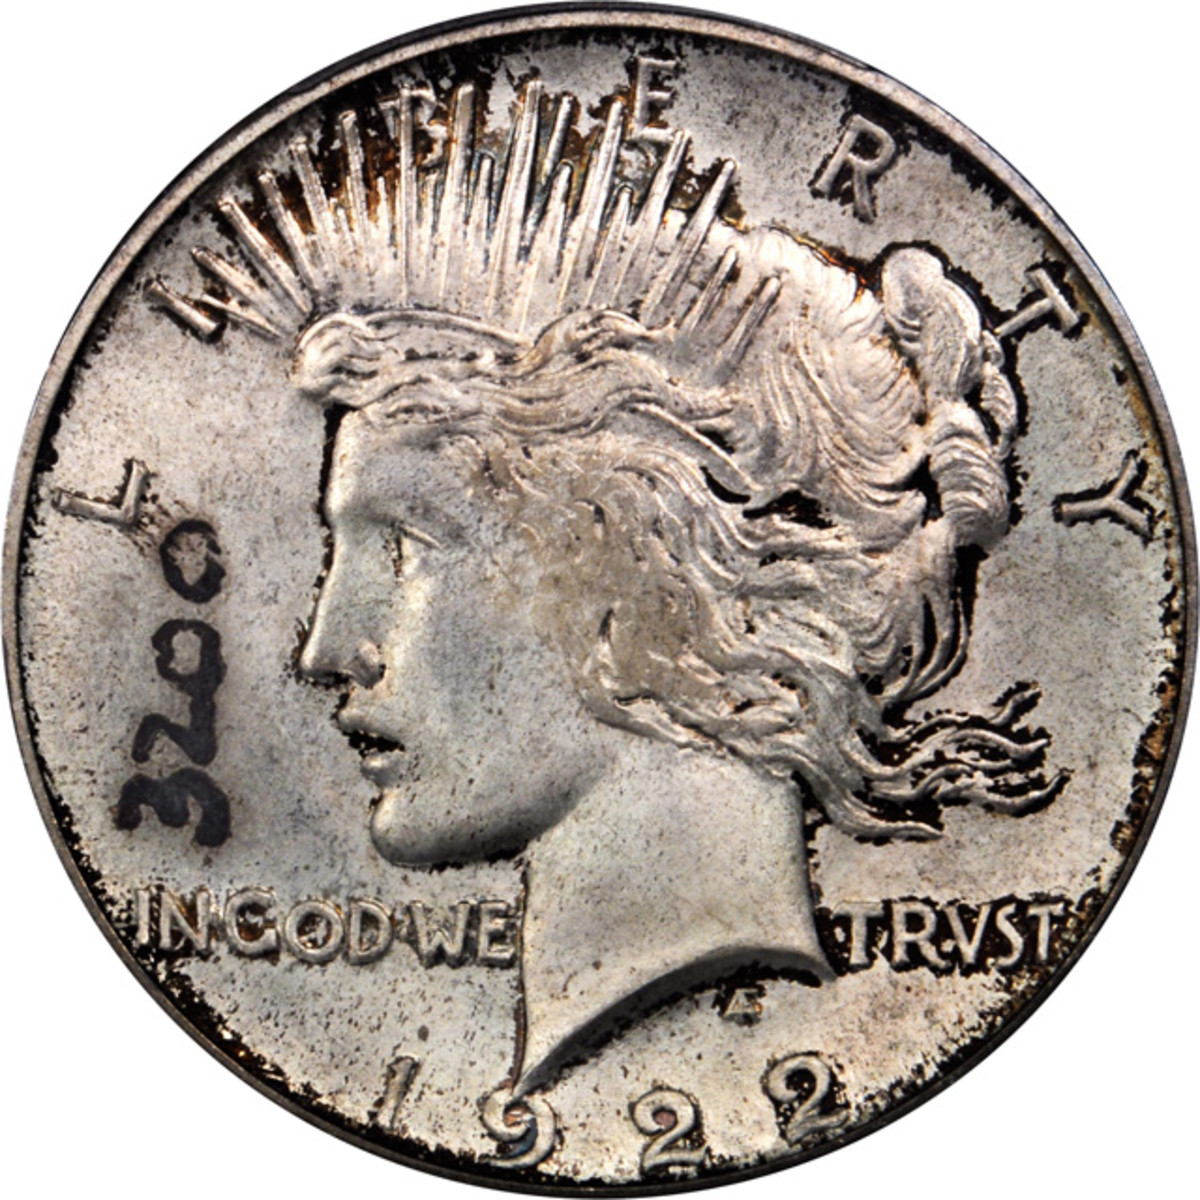 Lot 13168. 1922 Peace Silver Dollar. Modified High Relief Production Trial. Judd-2020. PCGS MS-65. Ex: Raymond T. Baker Estate.